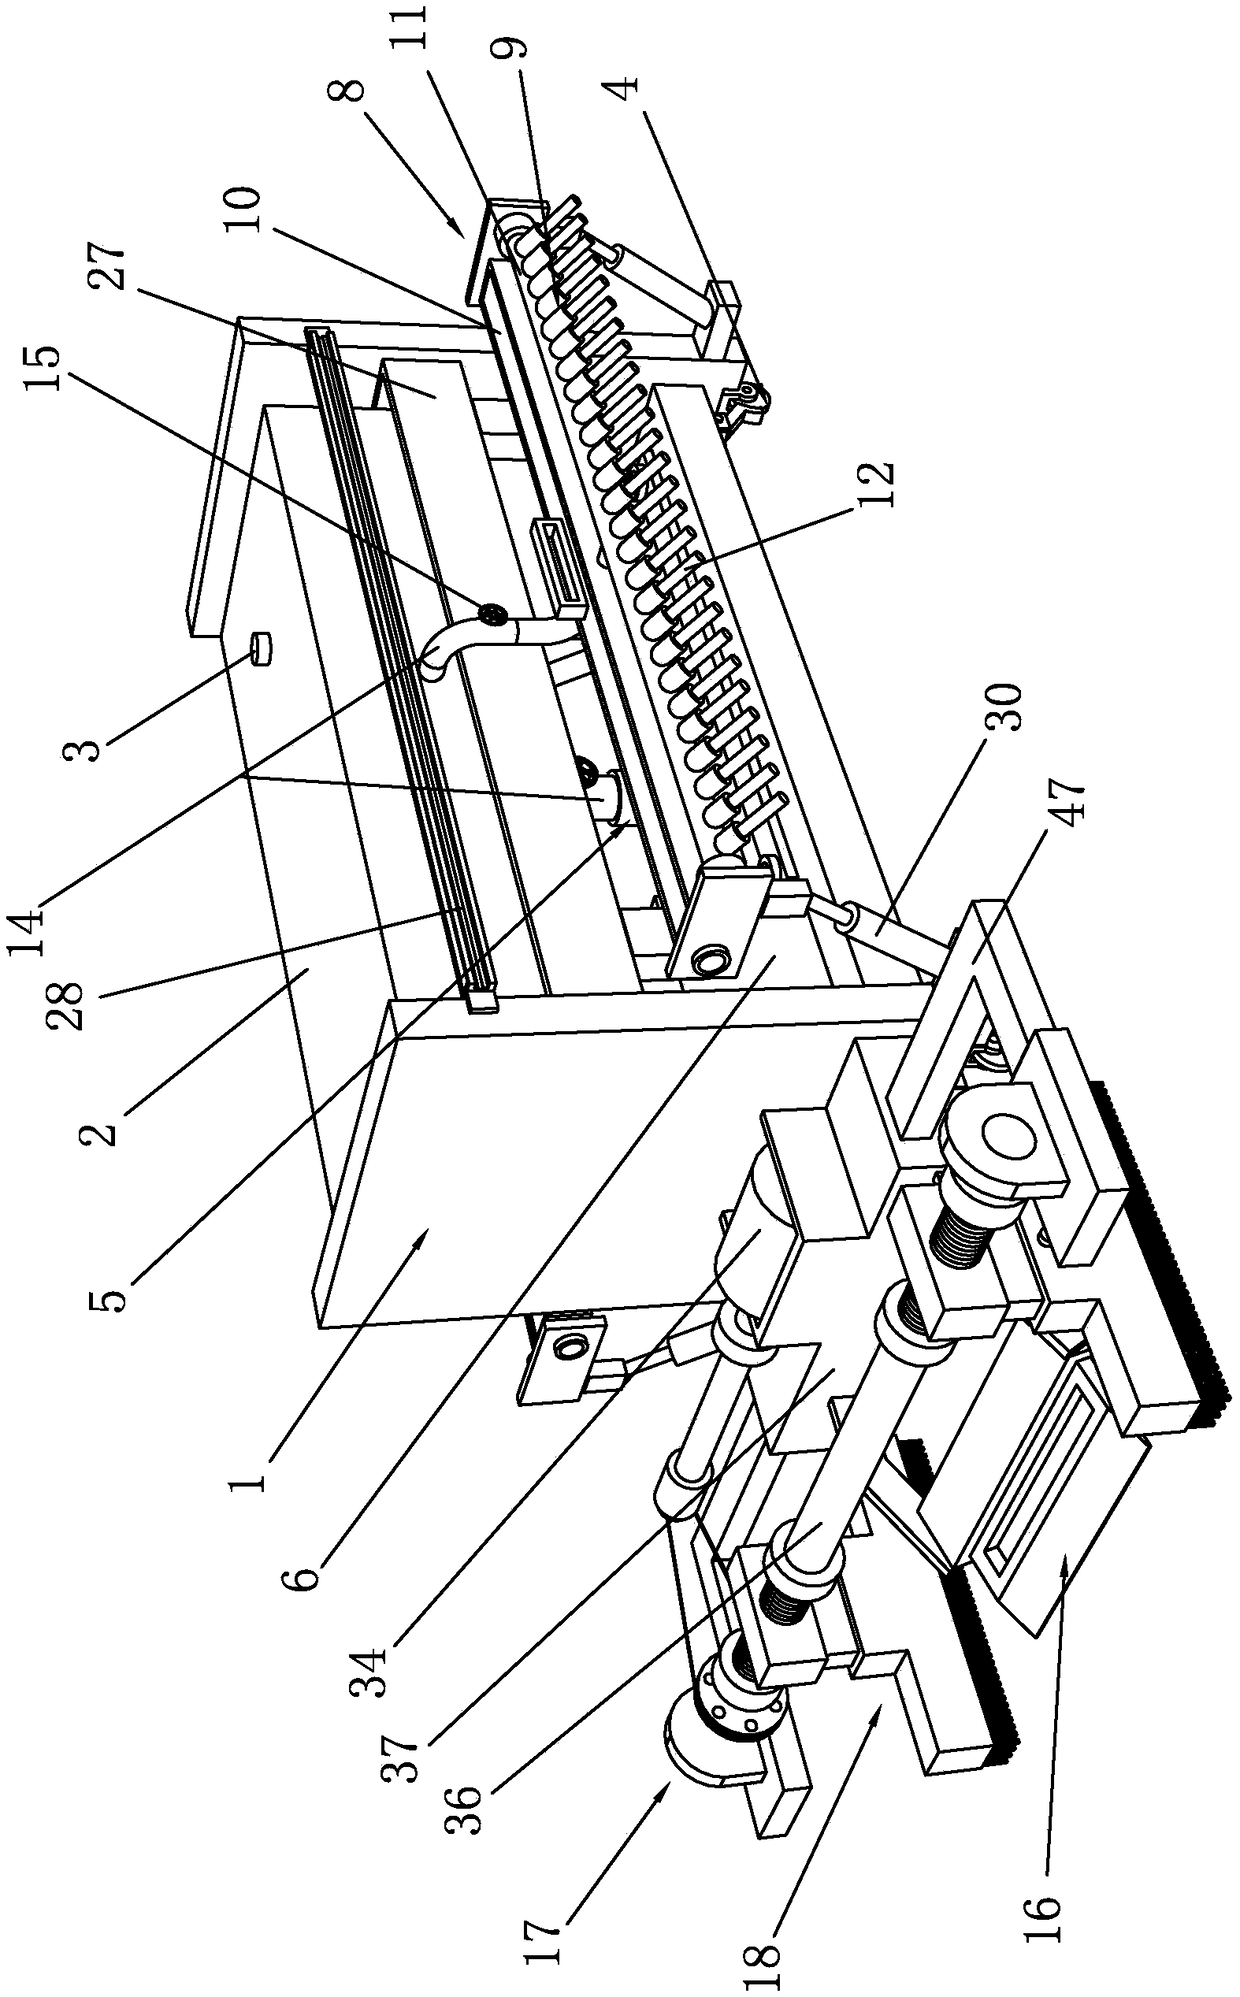 Bridge deck cleaning system for a bridge and cleaning method thereof